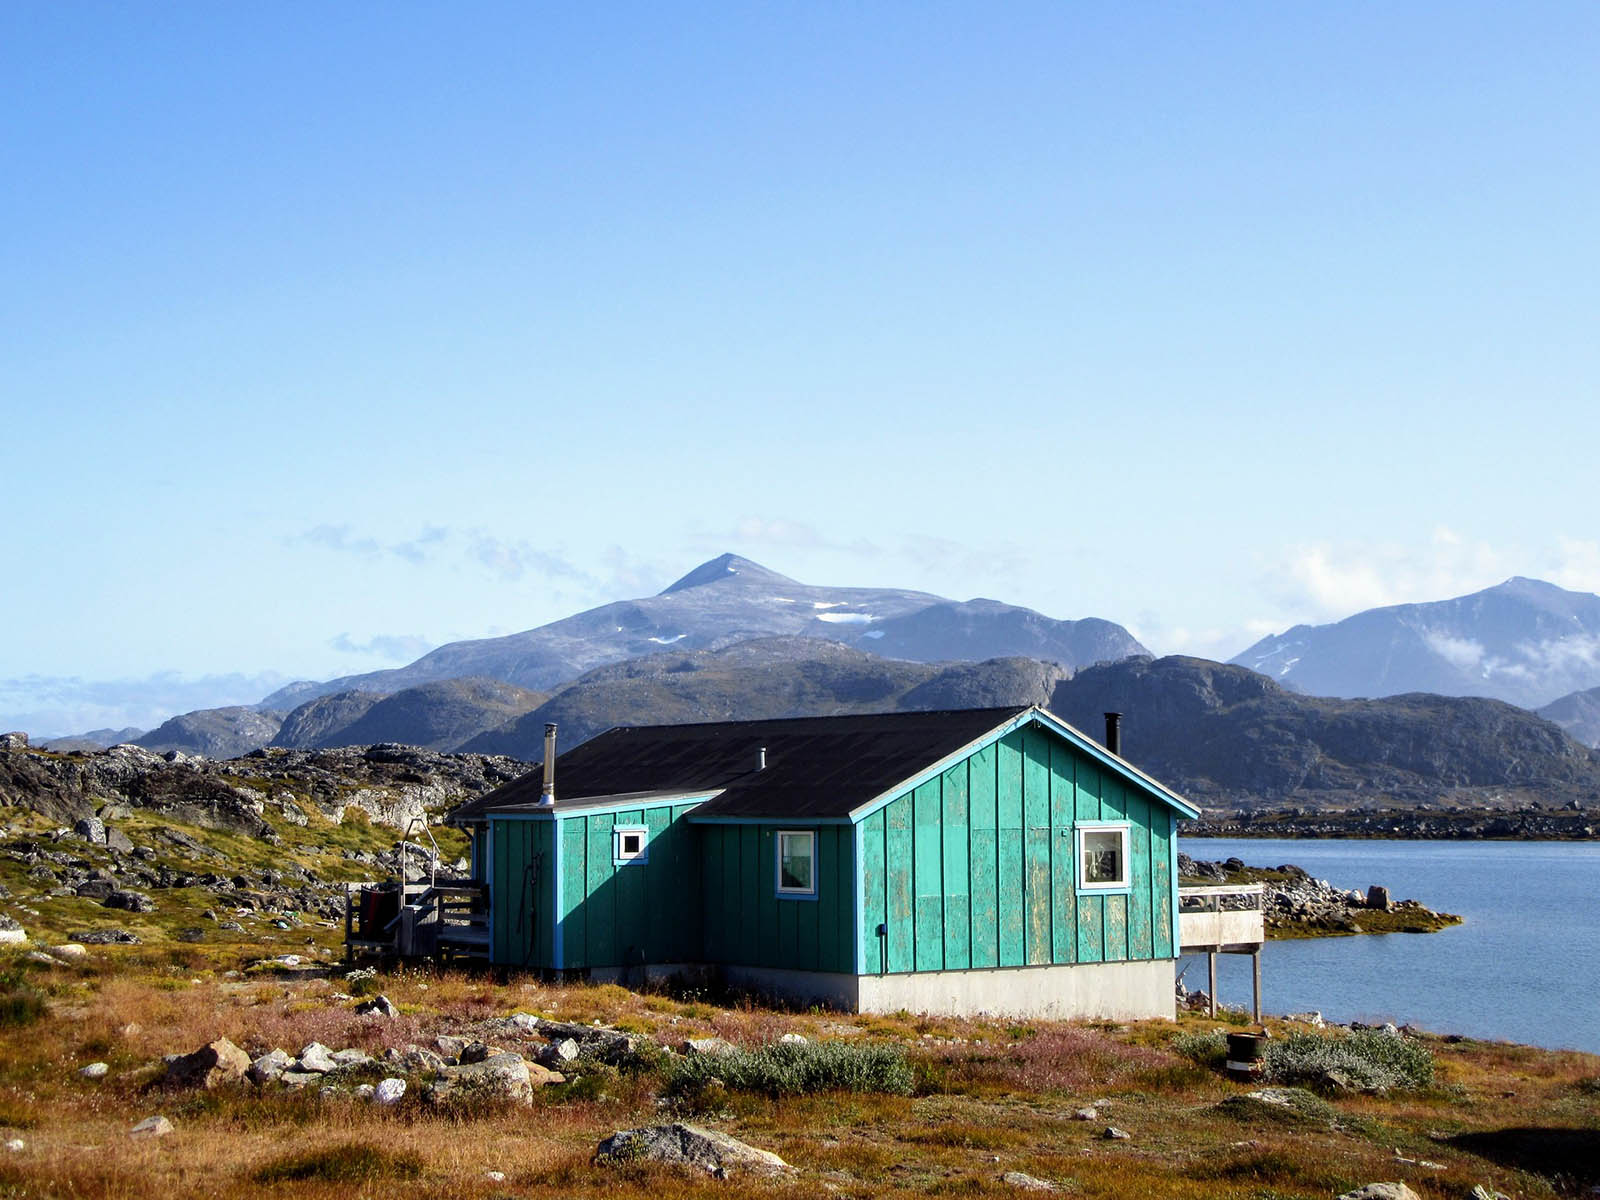 Village of Nanortalik meaning a place of Polar Bears - South Greenland